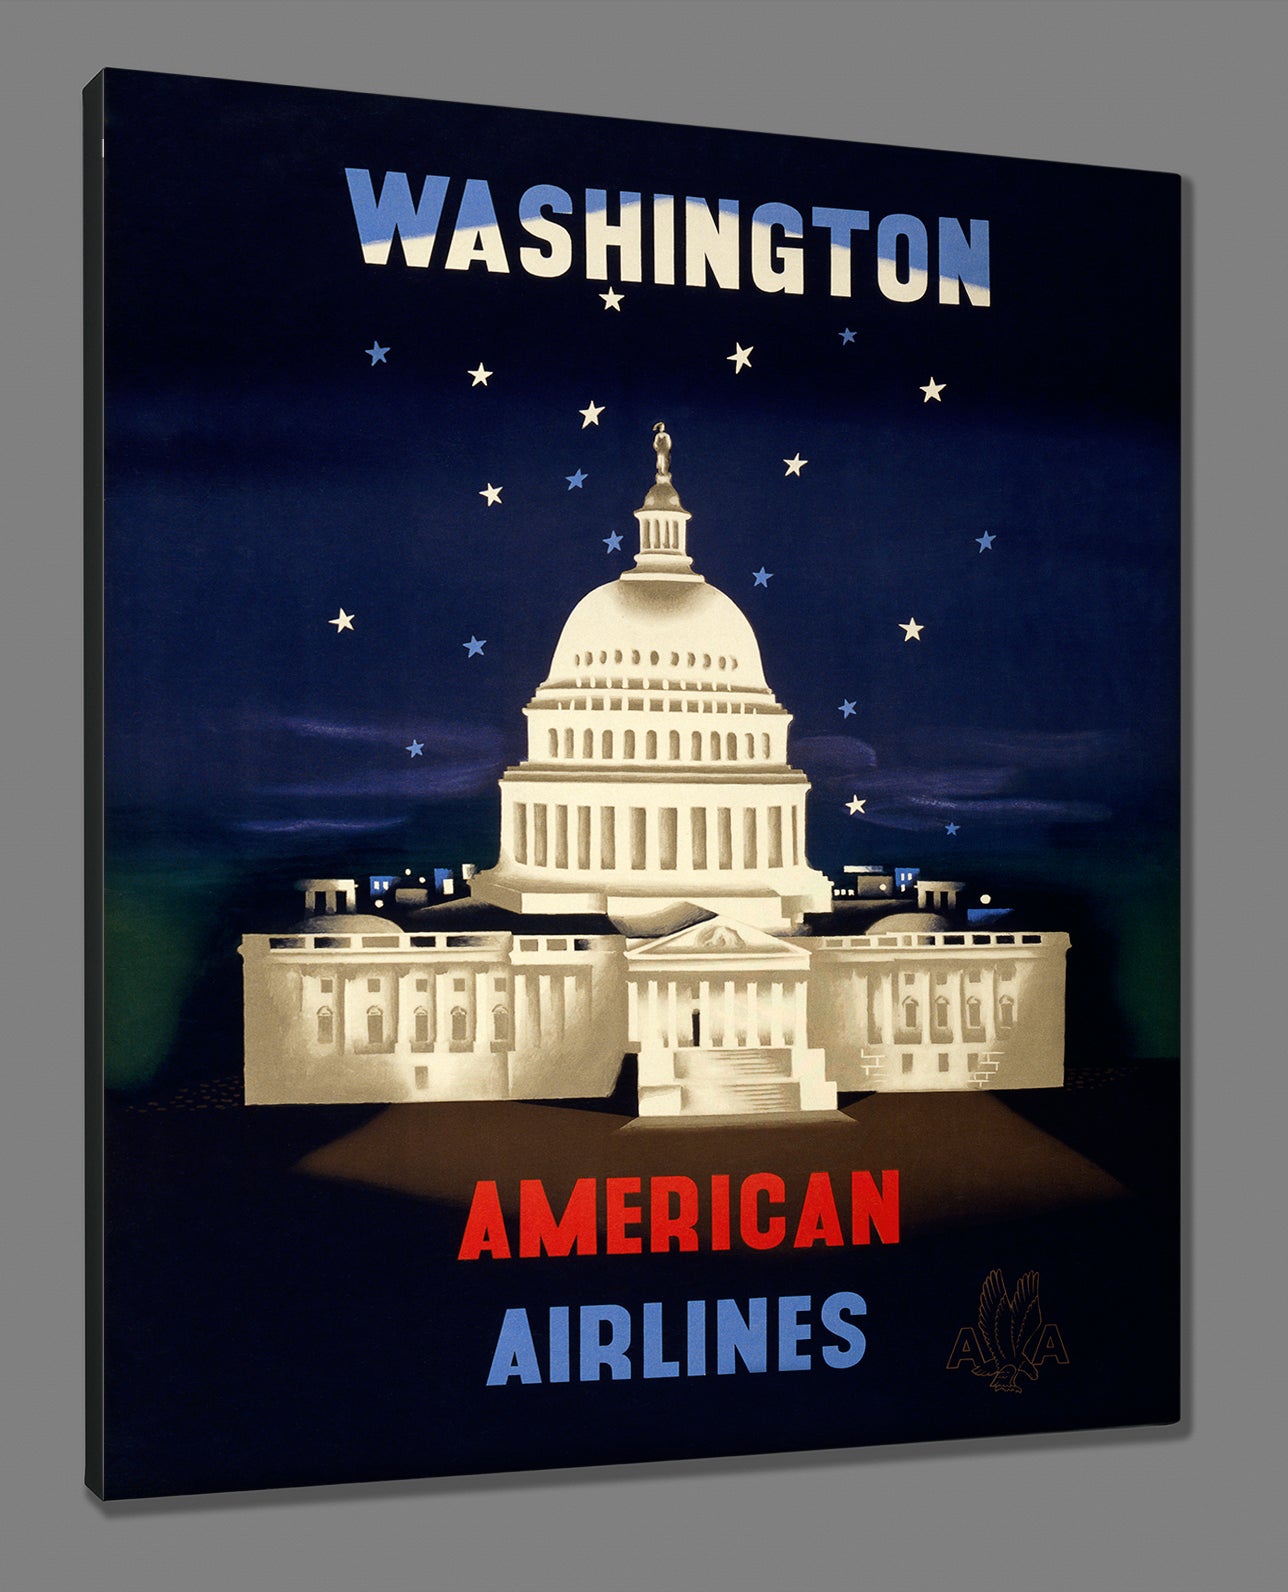 canvas print mockup of vintage travel poster for American Airlines to Washington DC